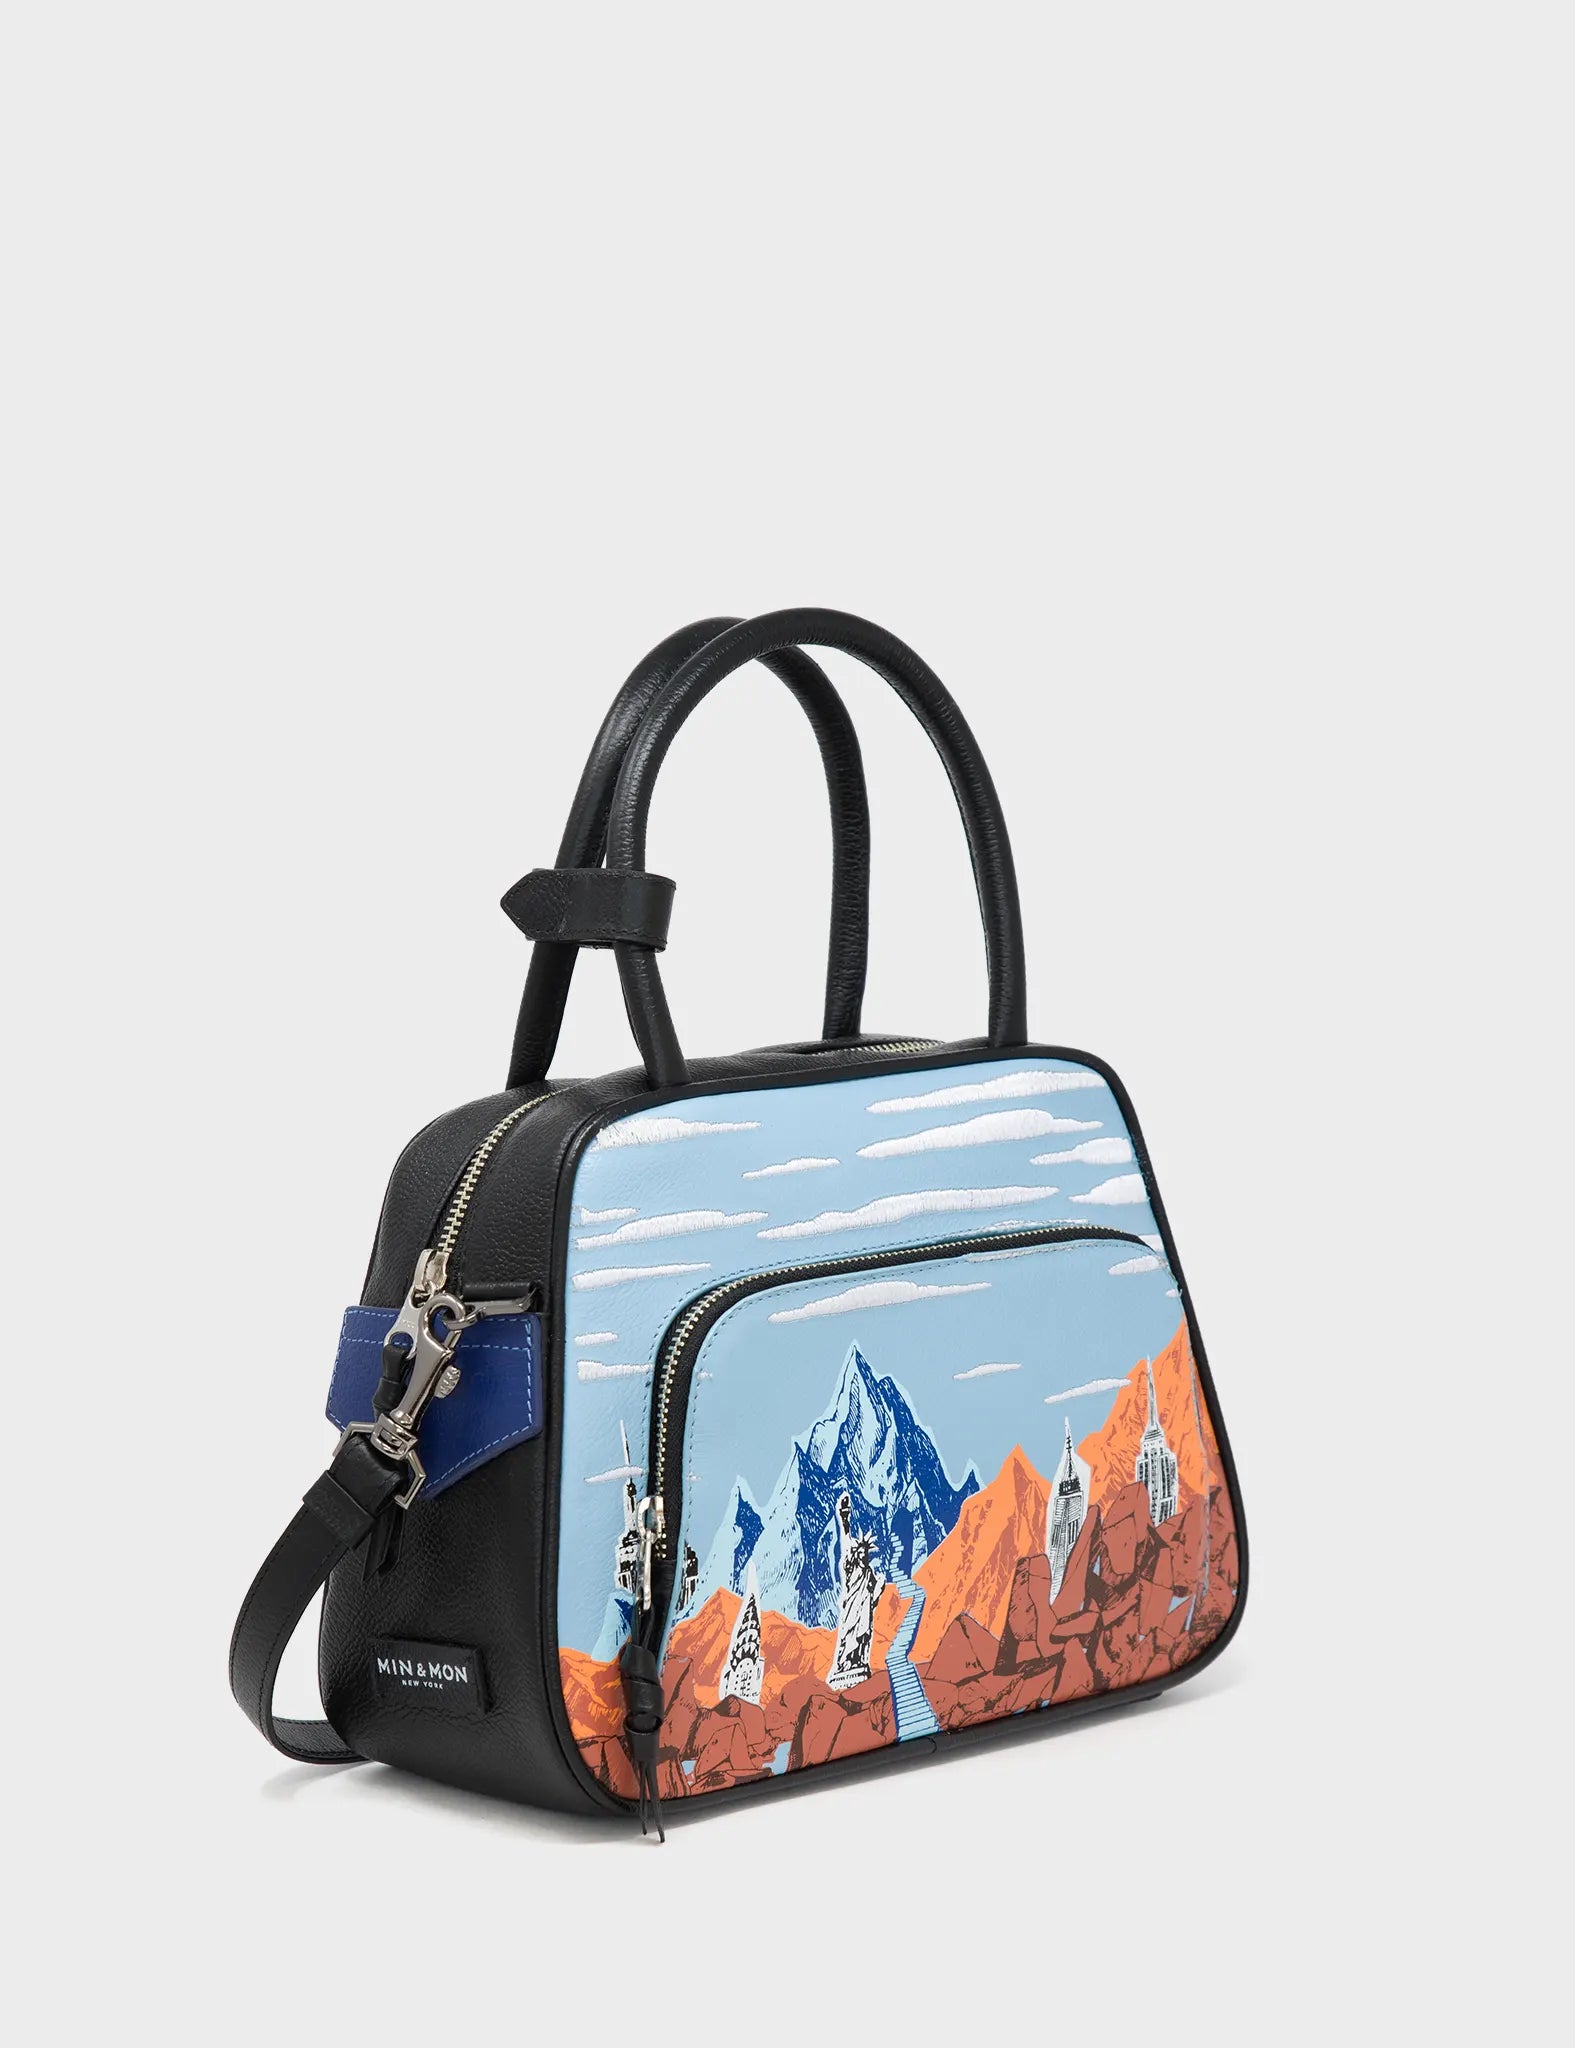 Blue Crossbody Leather Bag - Mountains, Flowers and Clouds Design